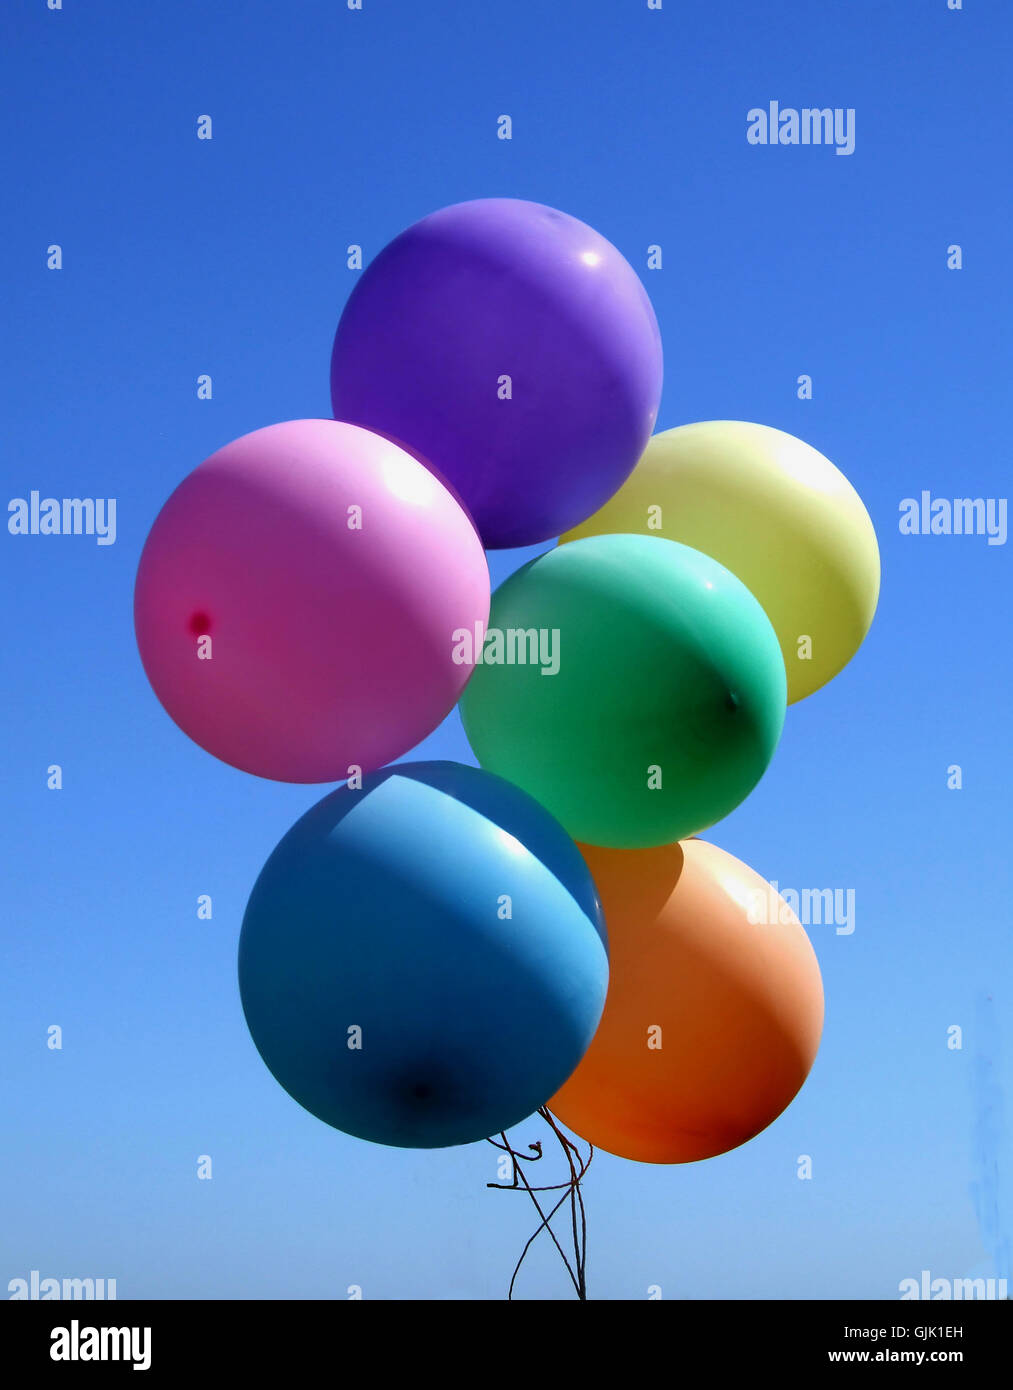 Gasballons High Resolution Stock Photography and Images - Alamy